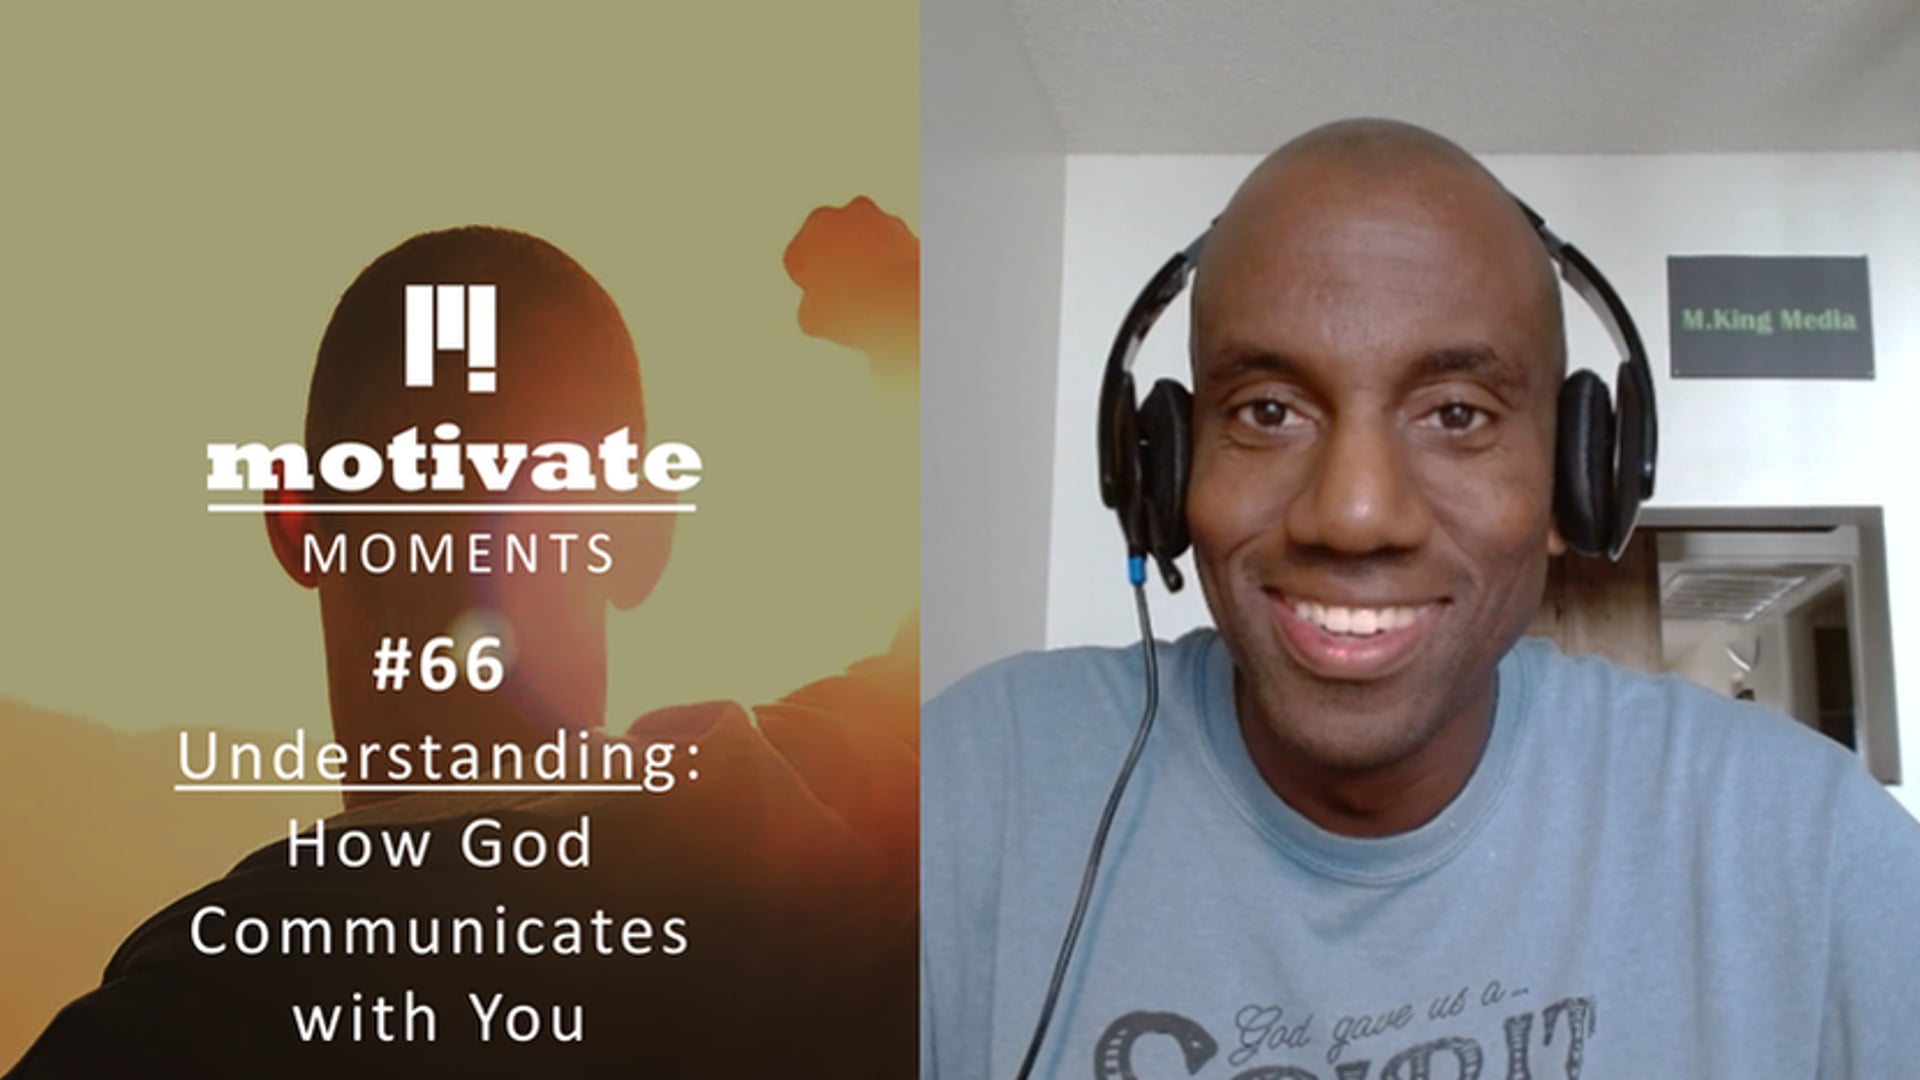 Motivate Moments #66 Understanding - How God Communicates with You